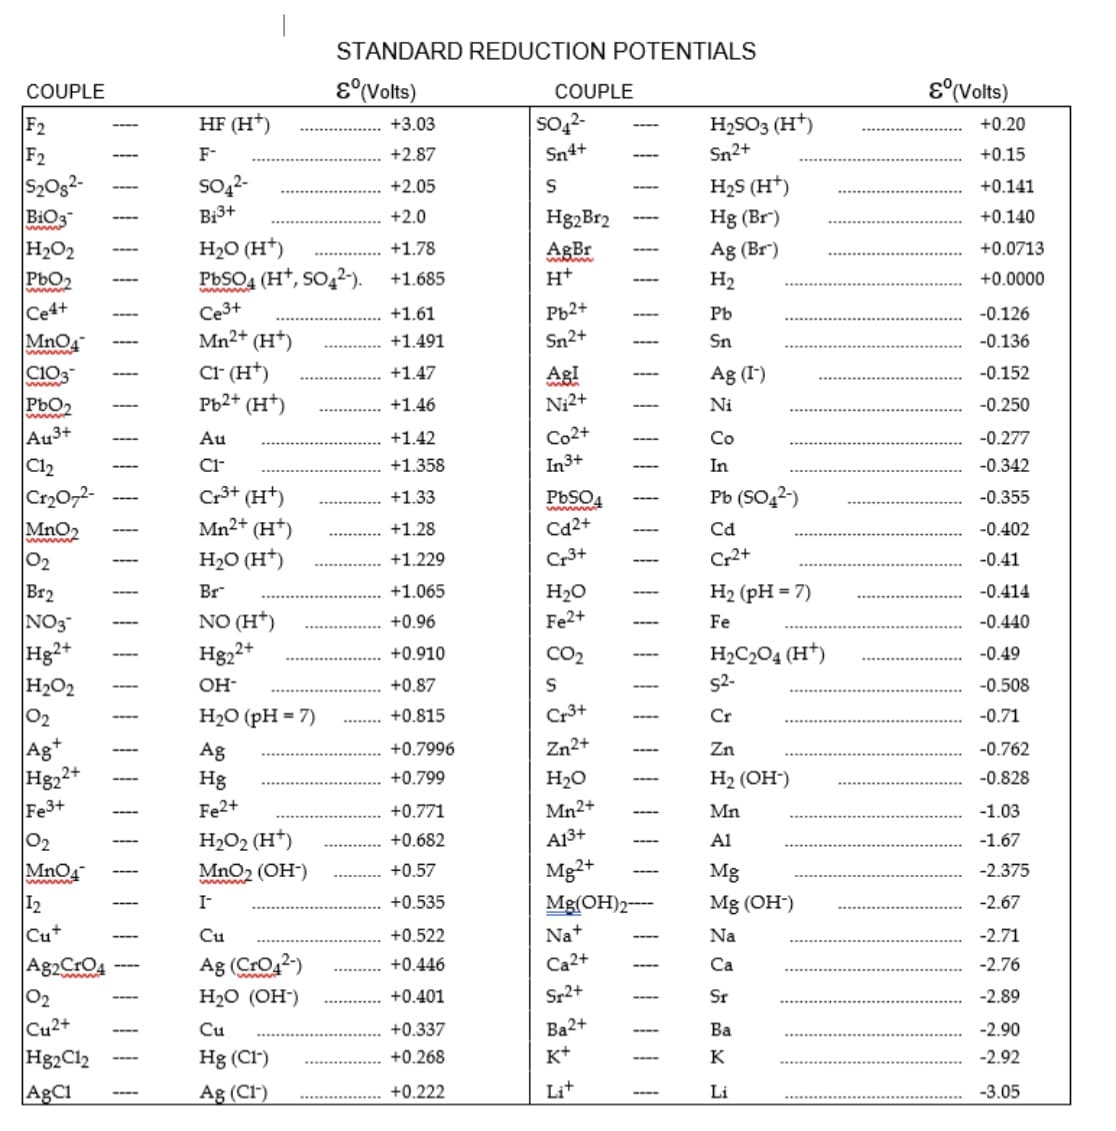 ### Standard Reduction Potentials Table

The table below lists standard reduction potentials (E°) for various redox couples, expressed in volts. These values indicate the tendency of a species to gain electrons (undergo reduction) under standard conditions (25°C, 1 M concentration, and 1 atm pressure). Positive values represent a greater tendency to be reduced.

**Couple** | **E° (Volts)**
--- | ---
F₂ / HF (H⁺) | +3.03
F₂ / F⁻ | +2.87
S₂O₈²⁻ / SO₄²⁻ | +2.05
BiO₃⁻ / Bi³⁺ | +2.0
H₂O₂ / H₂O (H⁺) | +1.78
PbO₂ / PbSO₄ (H⁺, SO₄²⁻) | +1.685
Ce⁴⁺ / Ce³⁺ | +1.61
MnO₄⁻ / Mn²⁺ (H⁺) | +1.491
ClO₃⁻ / Cl⁻ (H⁺) | +1.47
PbO₂ / Pb²⁺ (H⁺) | +1.46
Au³⁺ / Au | +1.42
Cl₂ / Cl⁻ | +1.358
Cr₂O₇²⁻ / Cr³⁺ (H⁺) | +1.33
MnO₂ / Mn²⁺ (H⁺) | +1.28
O₂ / H₂O₂ (H⁺) | +1.229
Br₂ / Br⁻ | +1.065
NO₃⁻ / NO (H⁺) | +0.96
Hg₂²⁺ / Hg₂²⁺ | +0.910
H₂O₂ / OH⁻ | +0.87
O₂ / H₂O (pH = 7) | +0.82
Ag⁺ / Ag | +0.7996
Hg₂²⁺ / Hg | +0.799
Fe³⁺ / Fe²⁺ | +0.771
H₂O₂ / H₂O (H⁺) | +0.682
